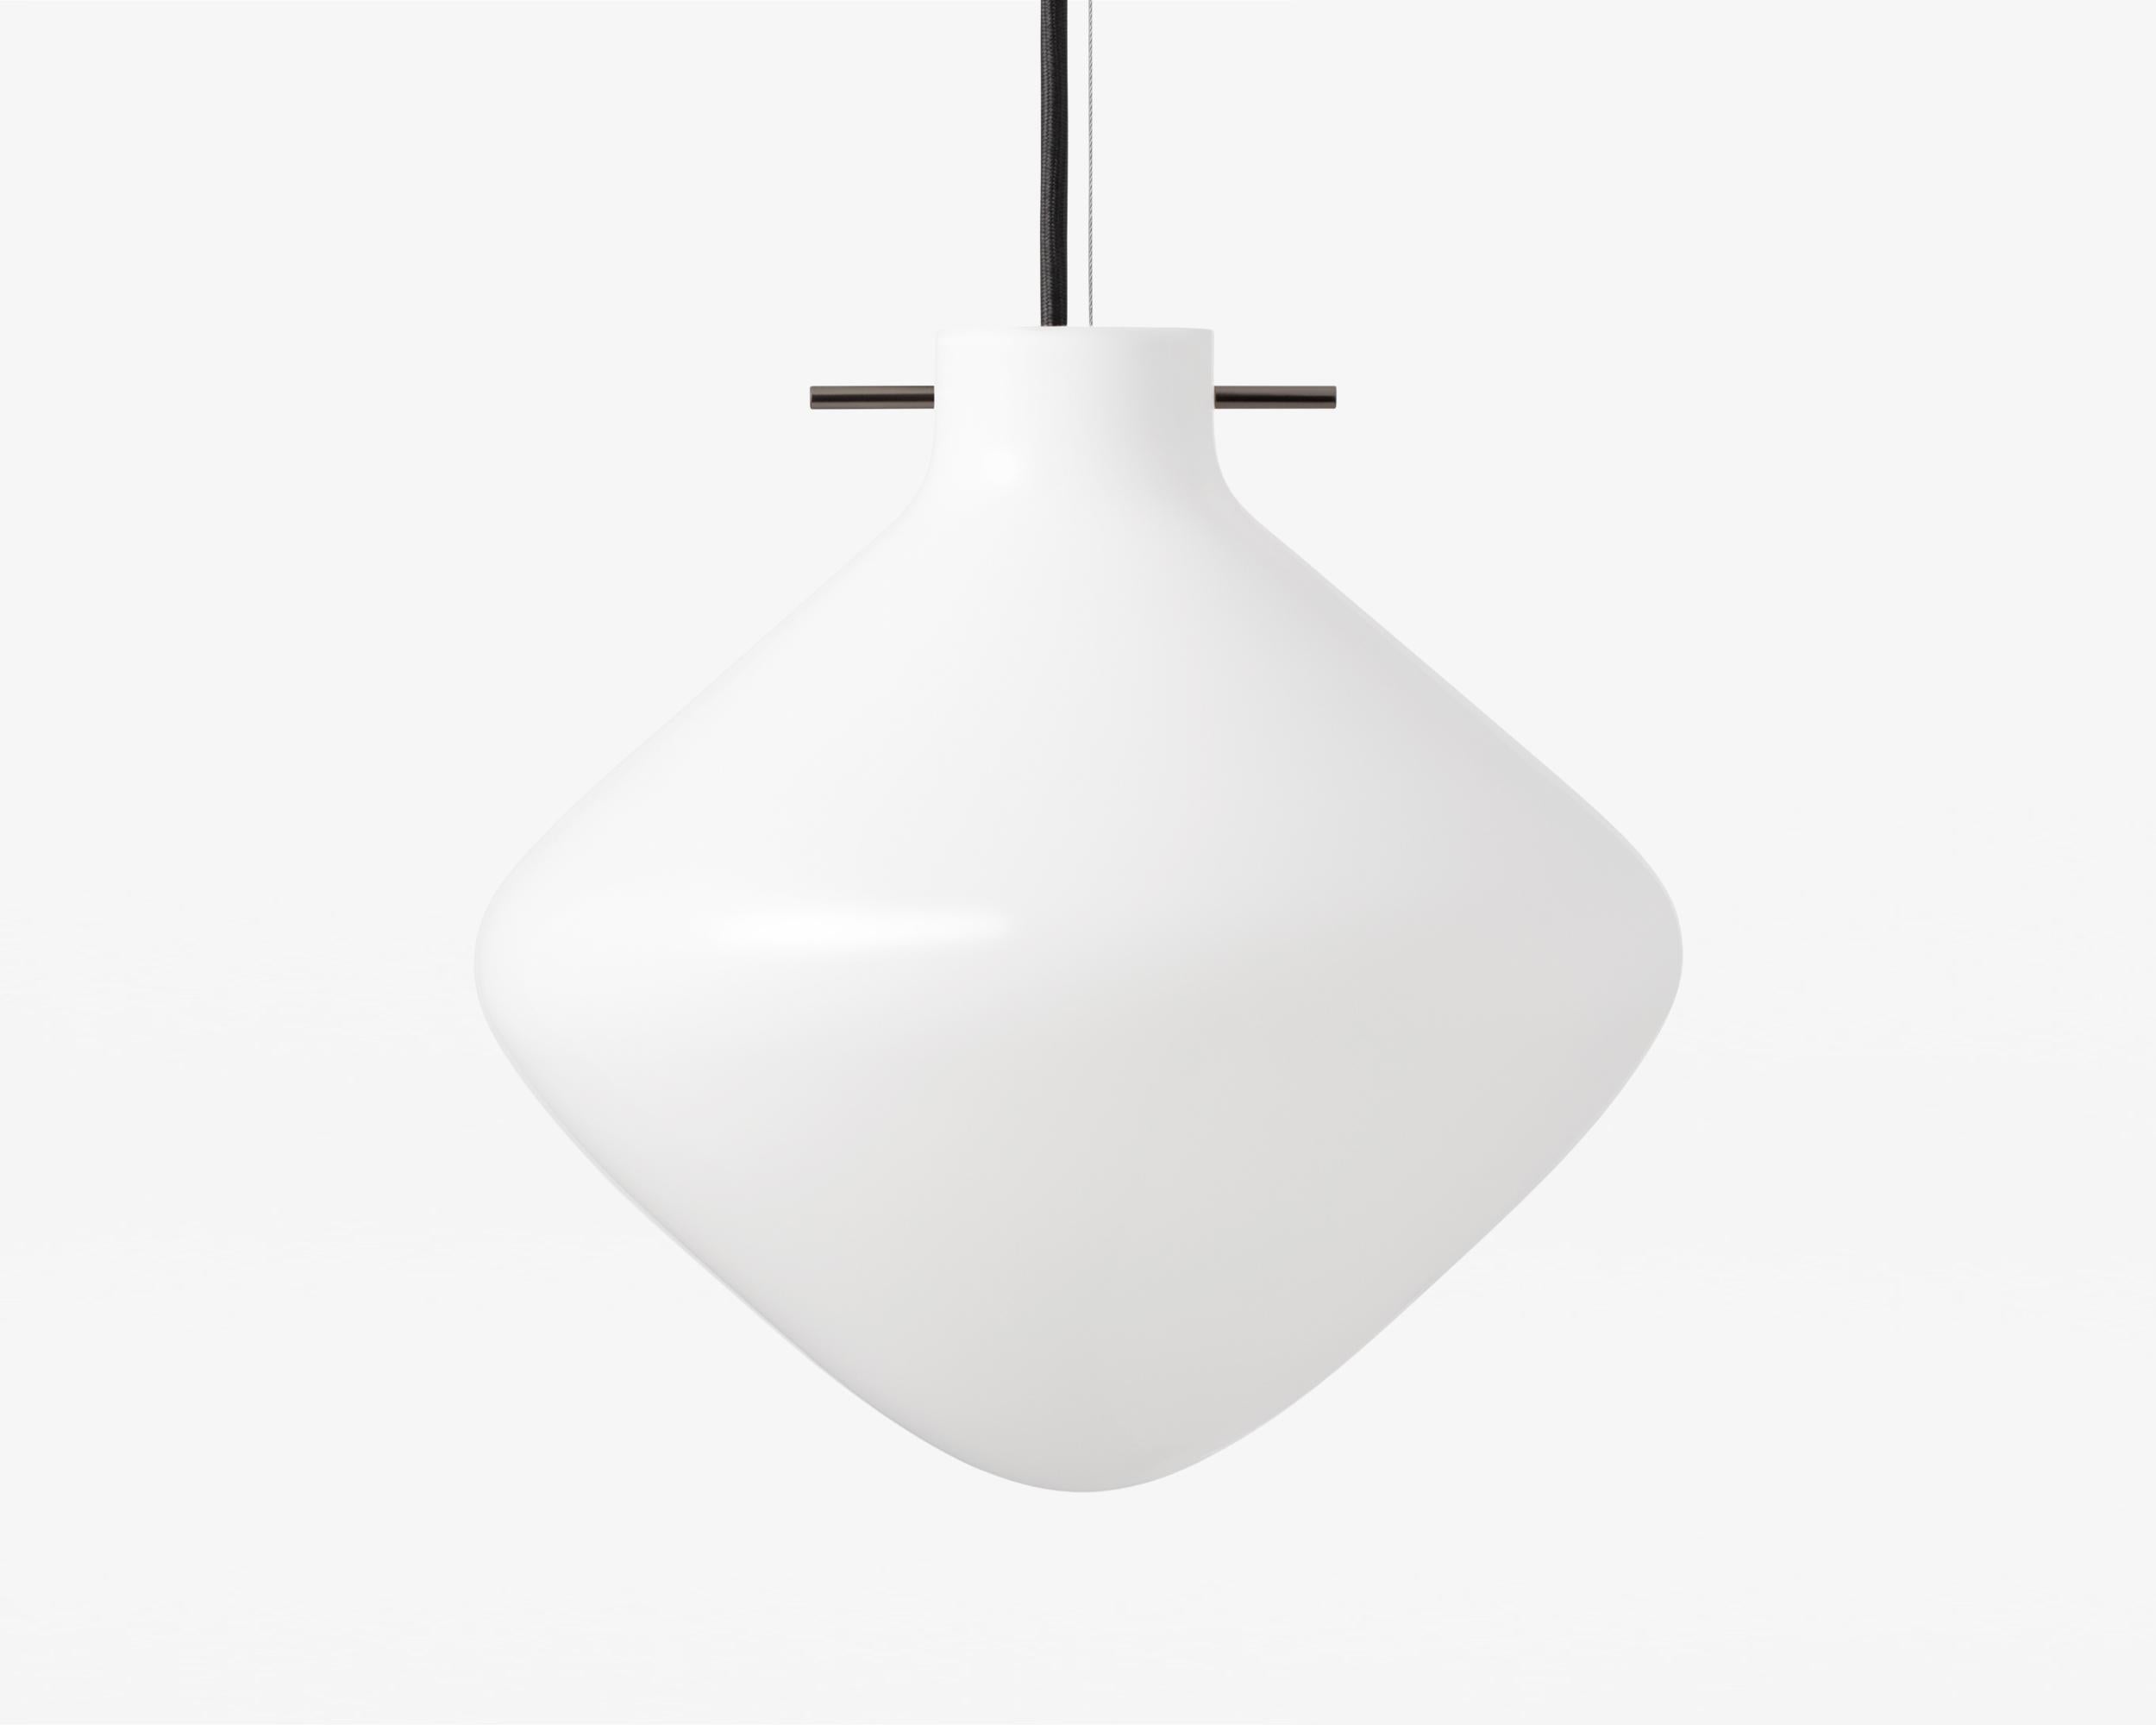 PENDANT LAMP REPOSE / 260 BY LYFA

Pendant lamp signed by GamFratesi for LYFA

D.260 mm H.252 mm
Opal glass / Black steel or Brass

Textile wire (black or white) 300cm
Light source: E14 max 60W (110V-230V)

-- 
REPOSE is a new series of